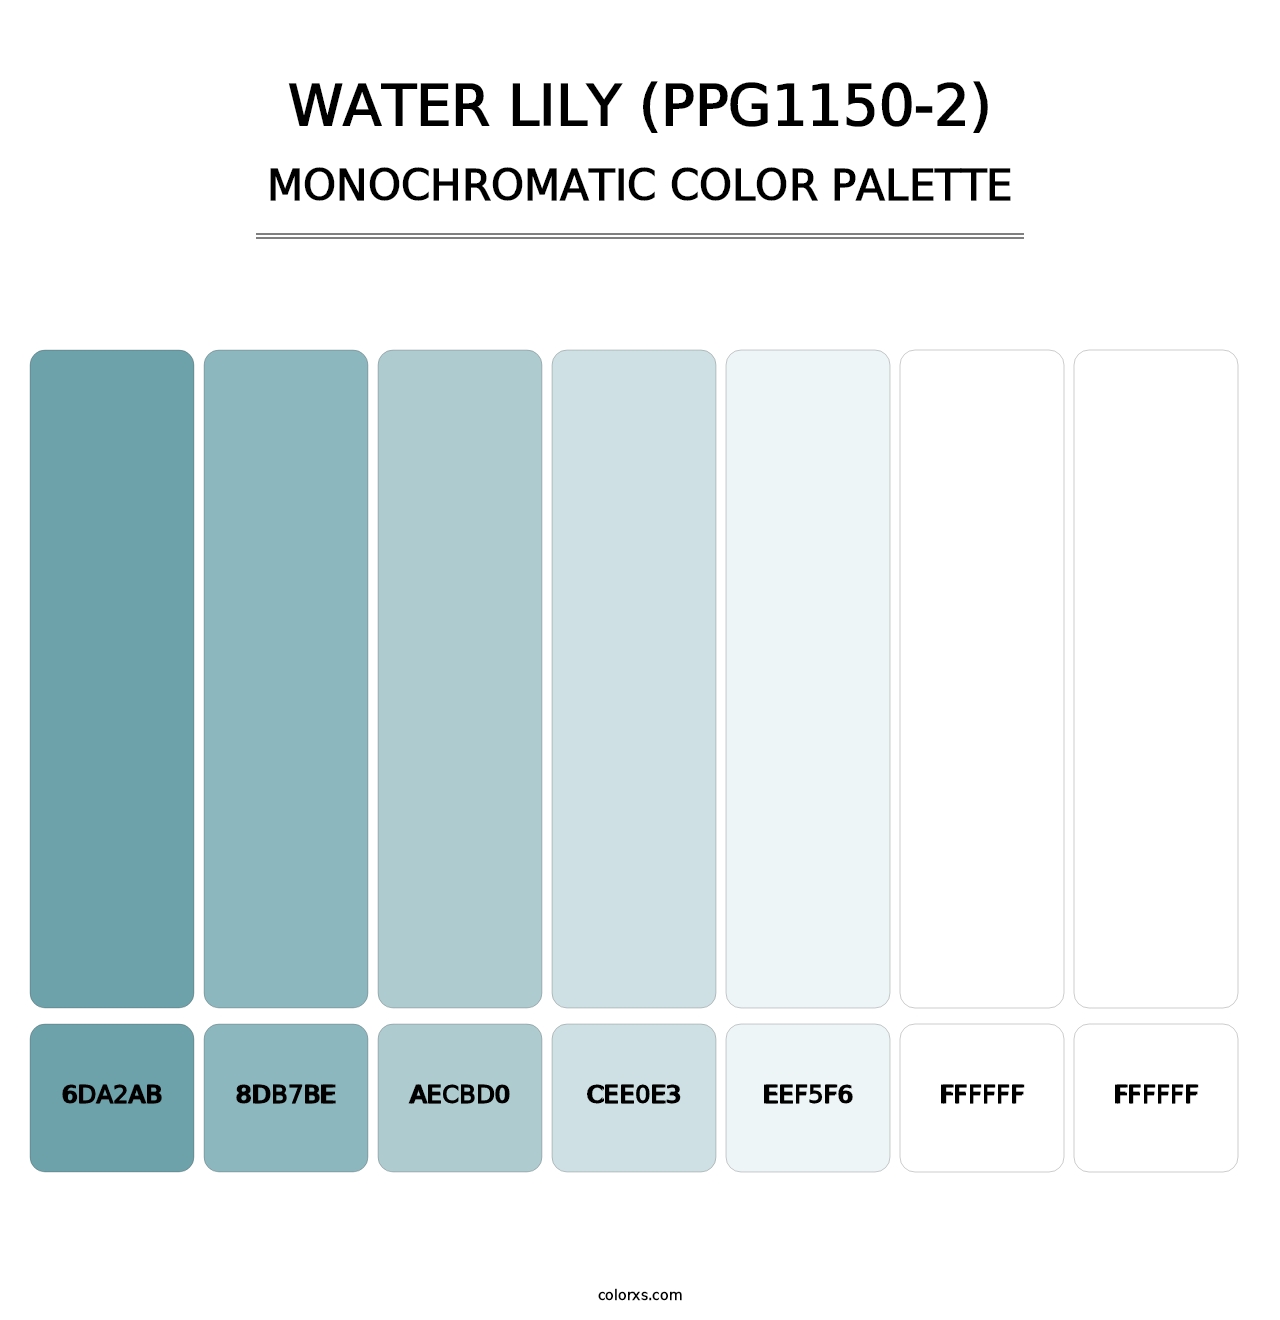 Water Lily (PPG1150-2) - Monochromatic Color Palette